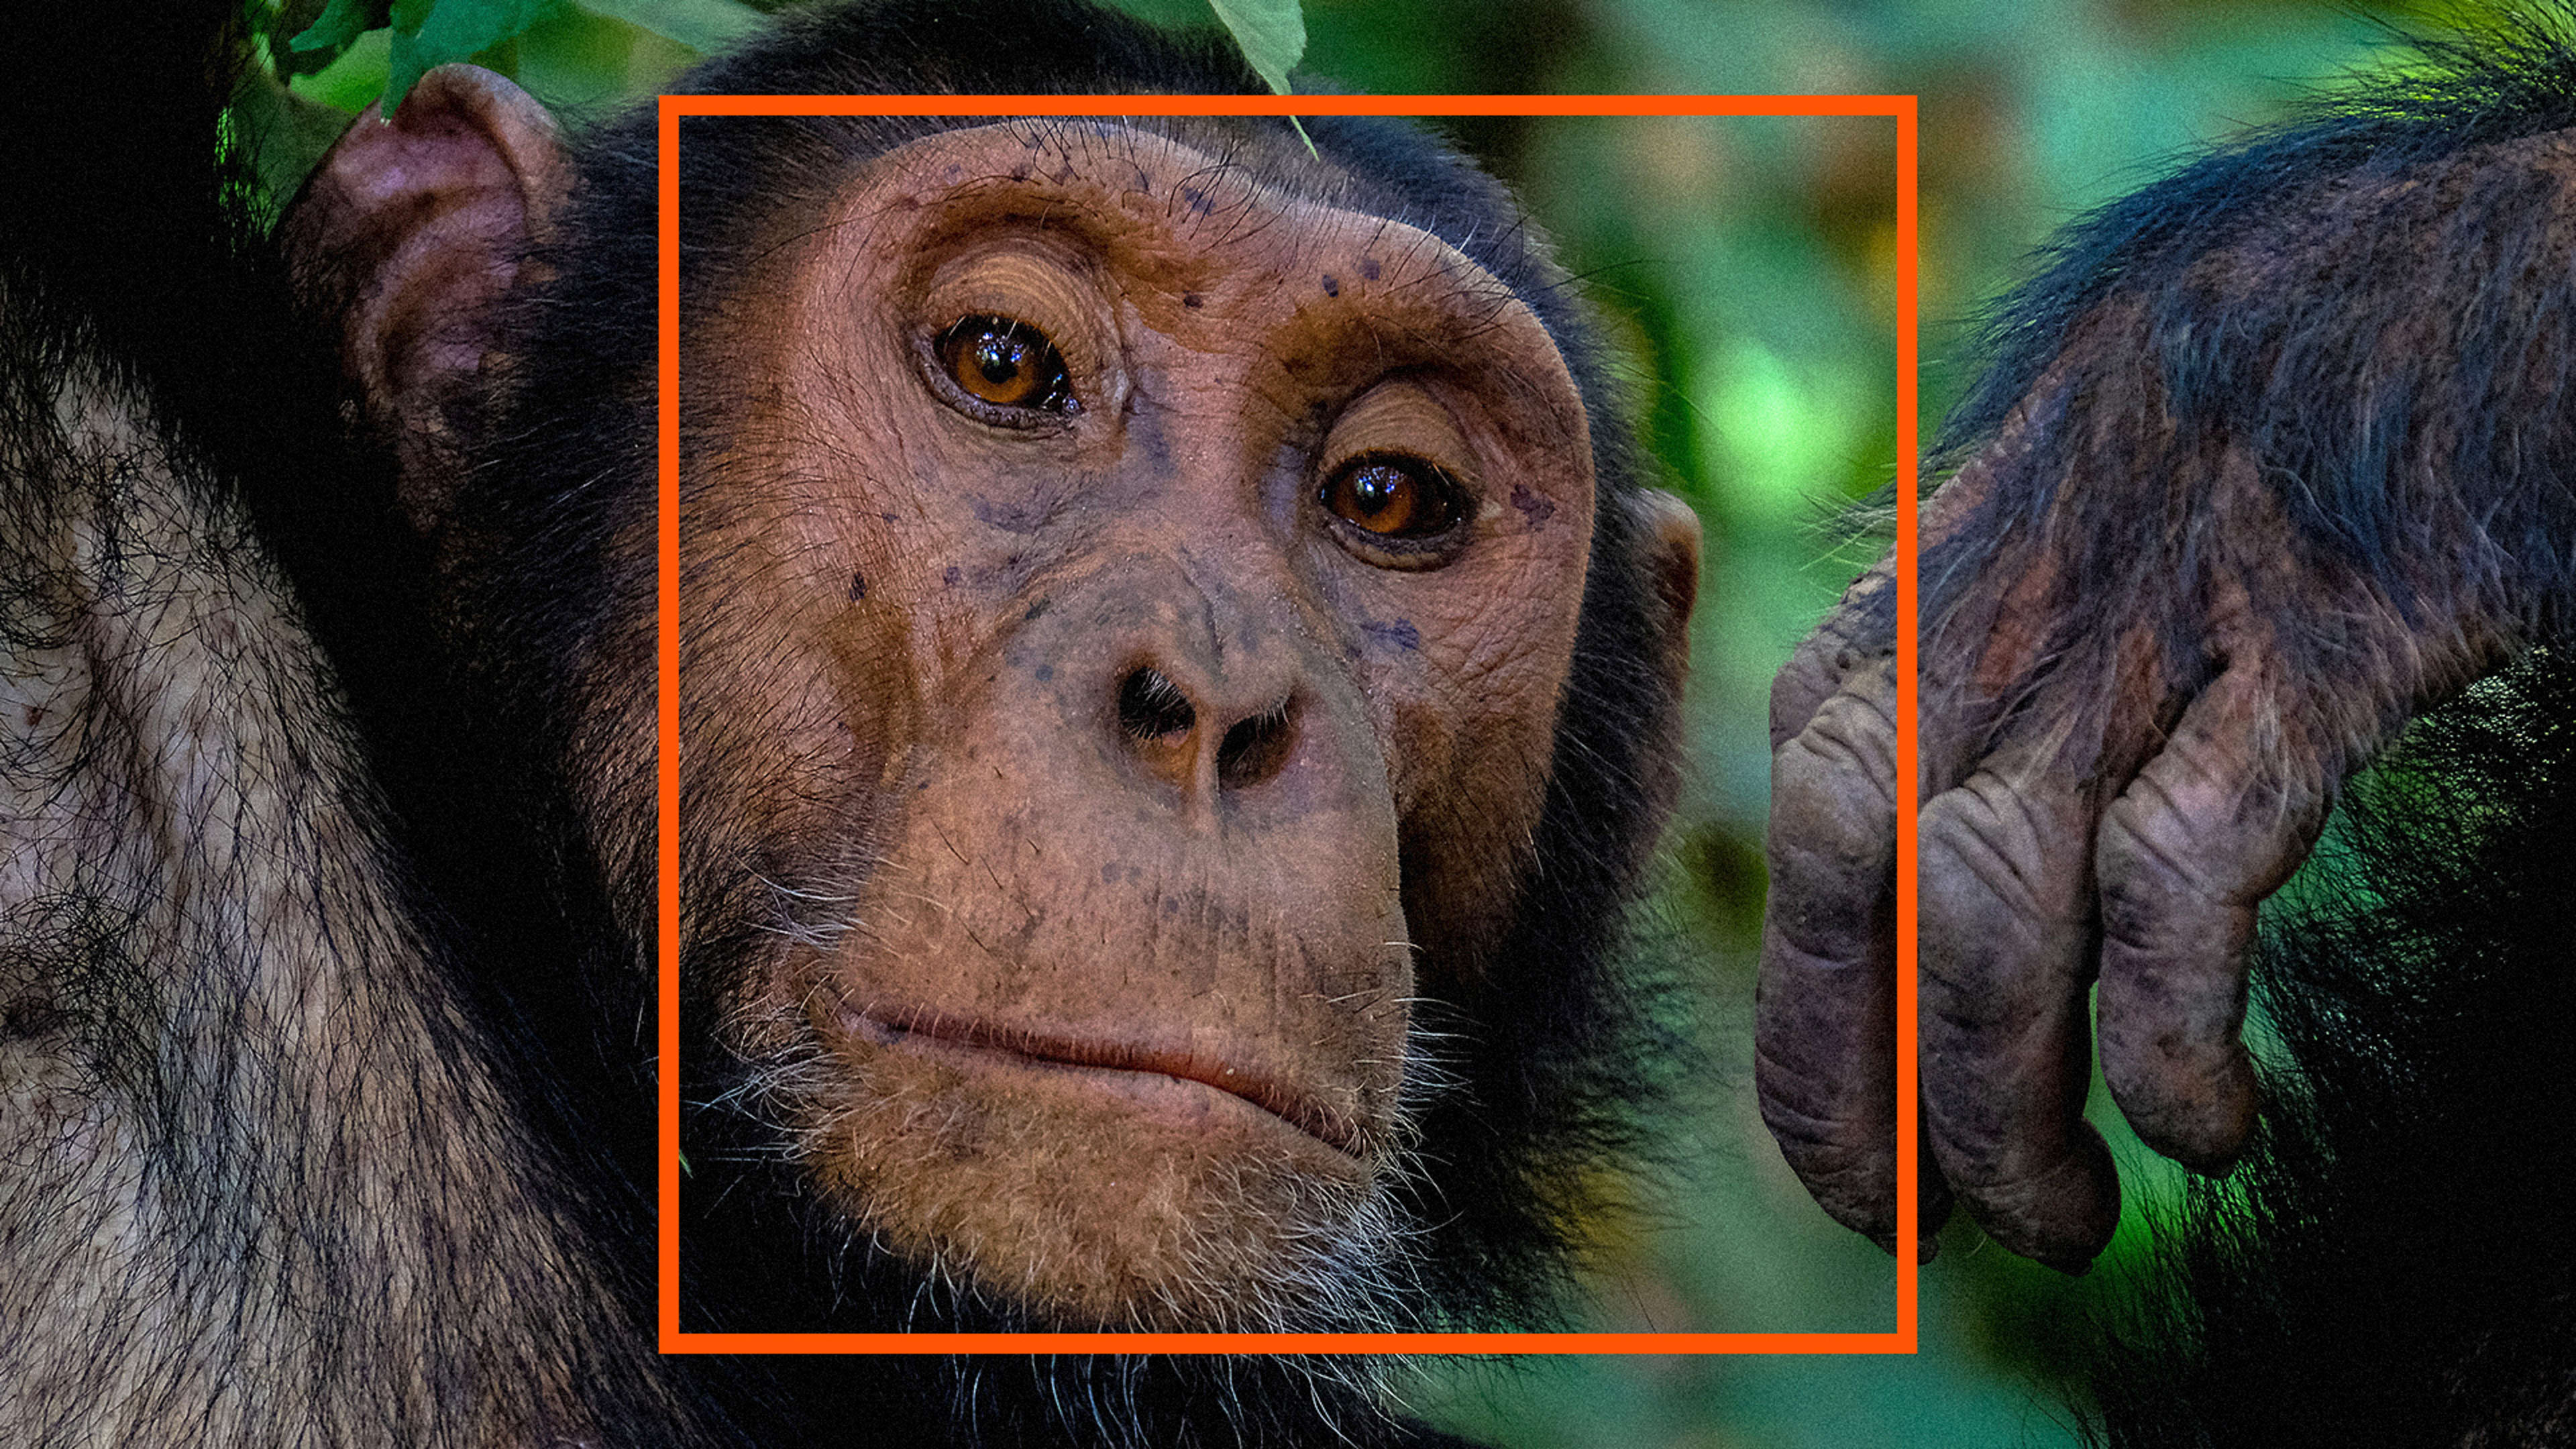 Facial recognition for chimps searches the internet for stolen baby apes